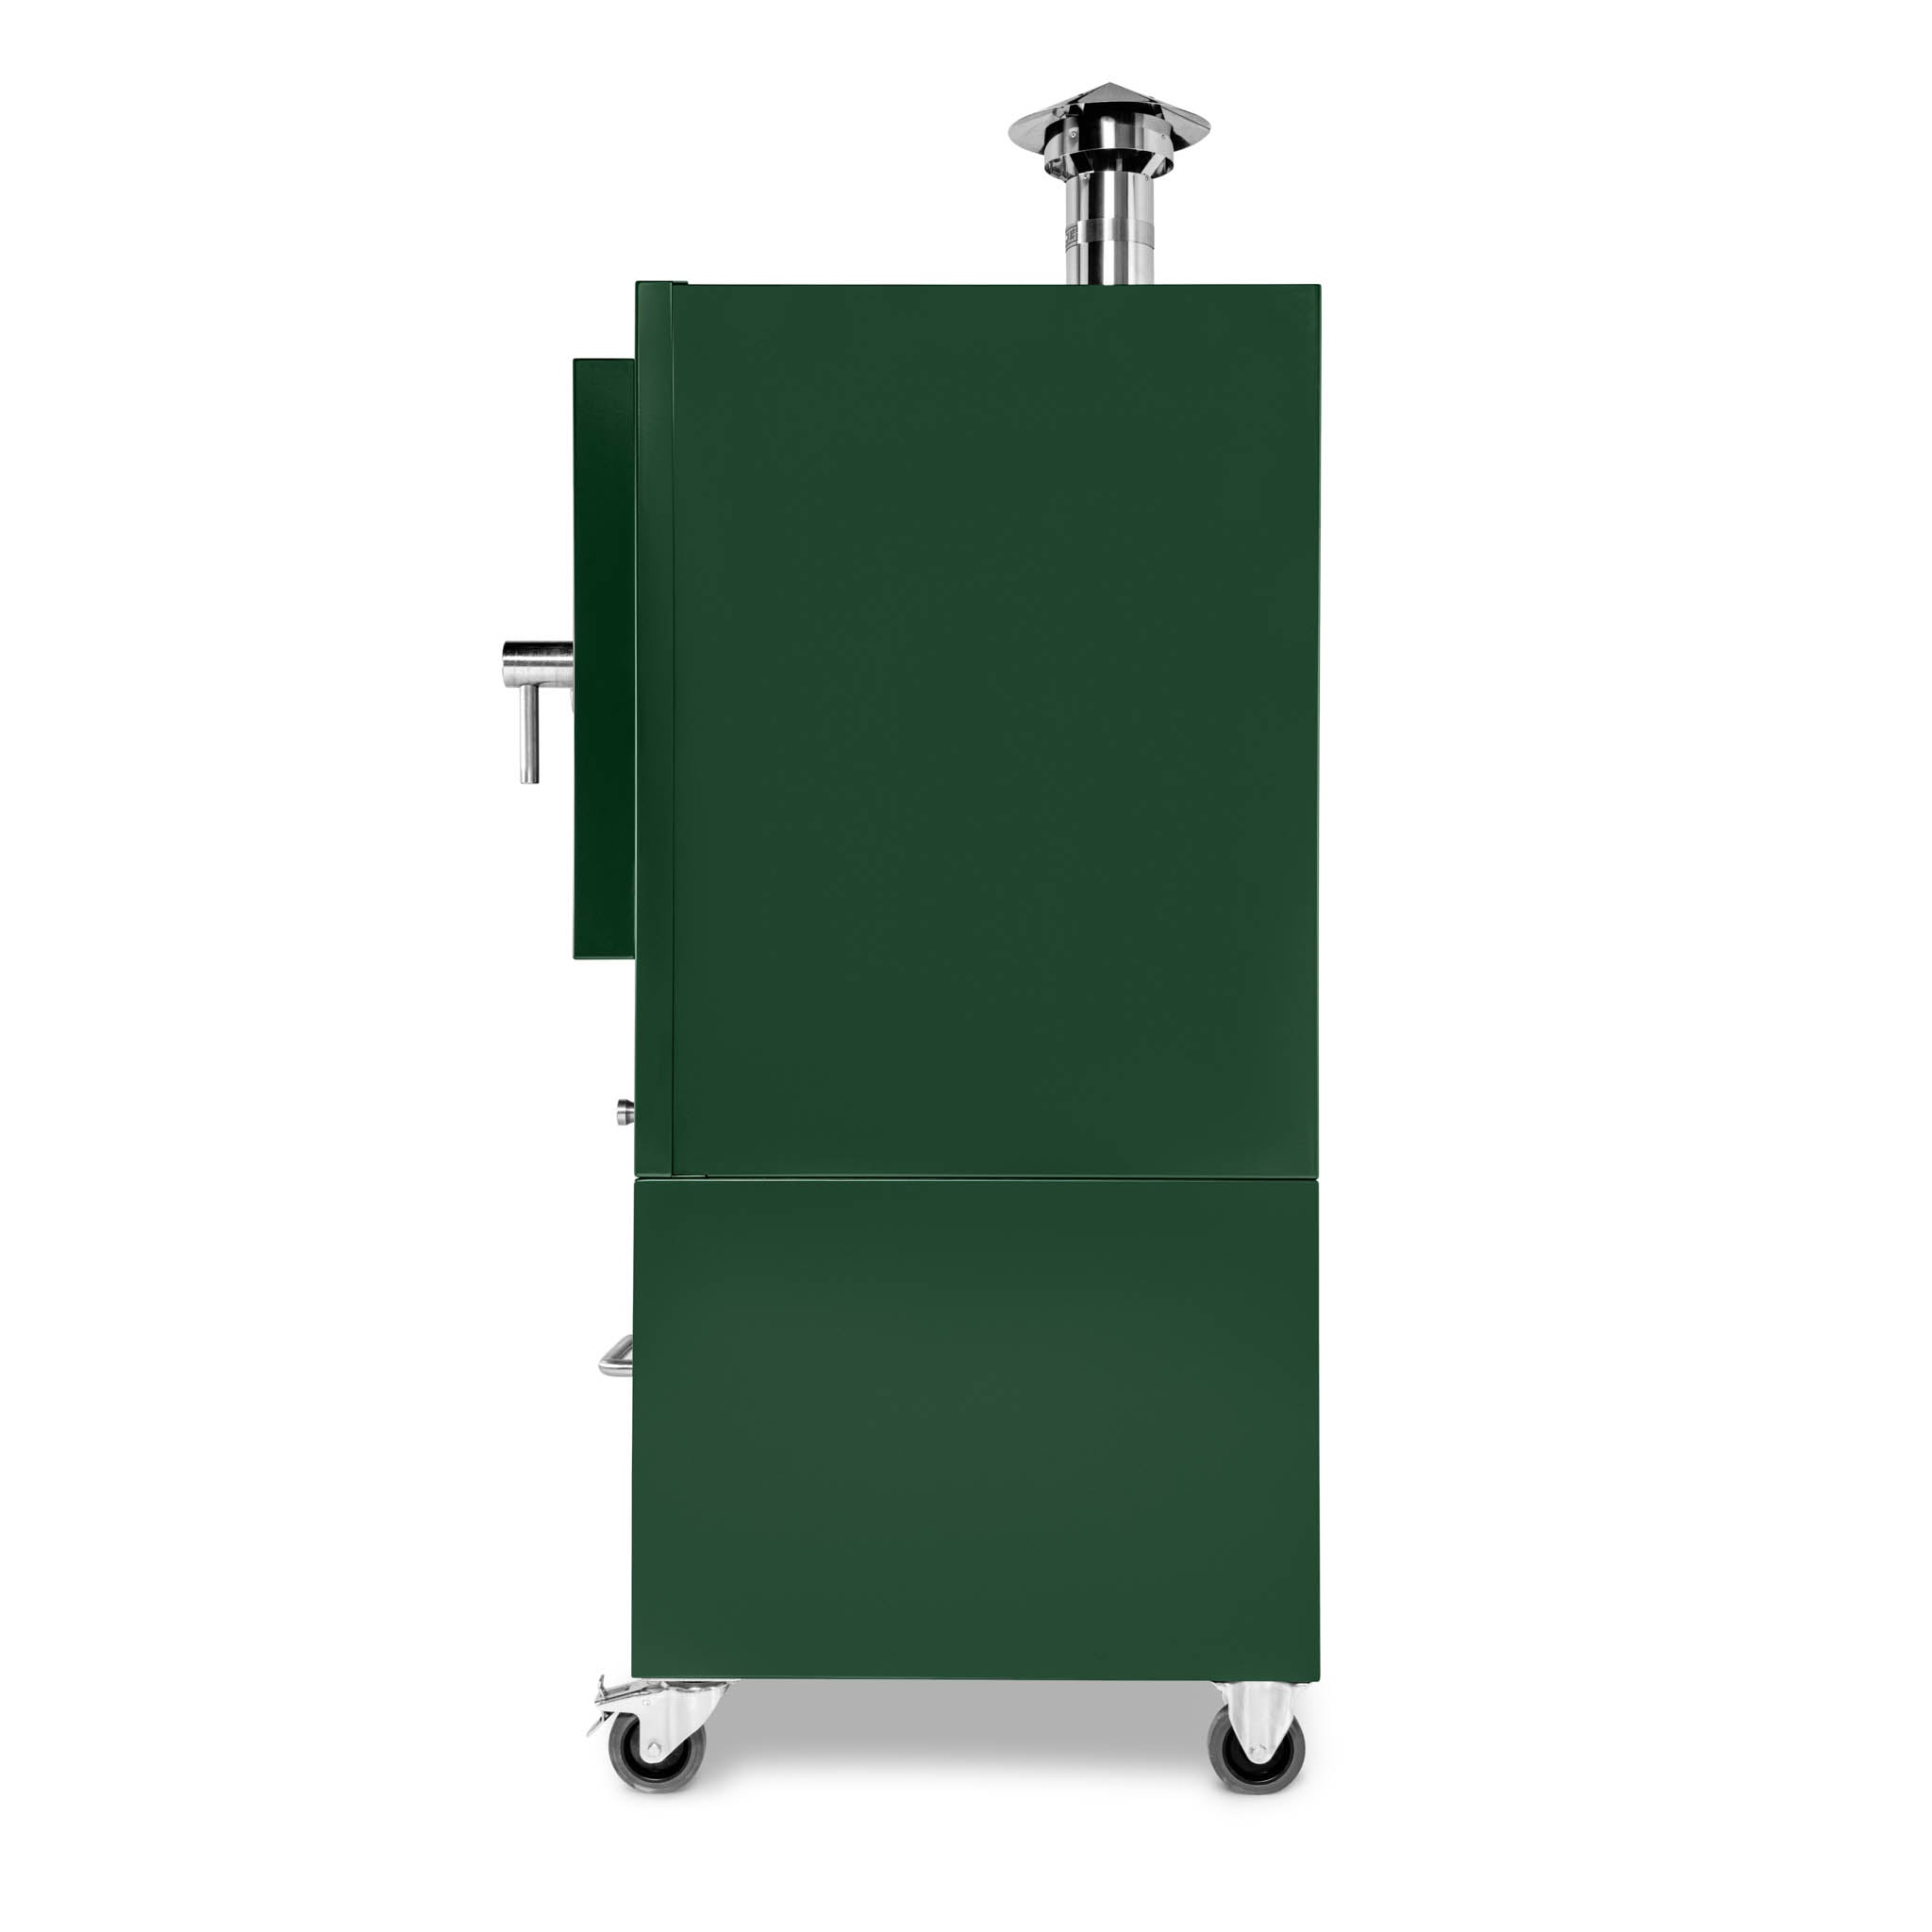 Professional Charlie Charcoal Oven - Green Chilli - Charlie Oven